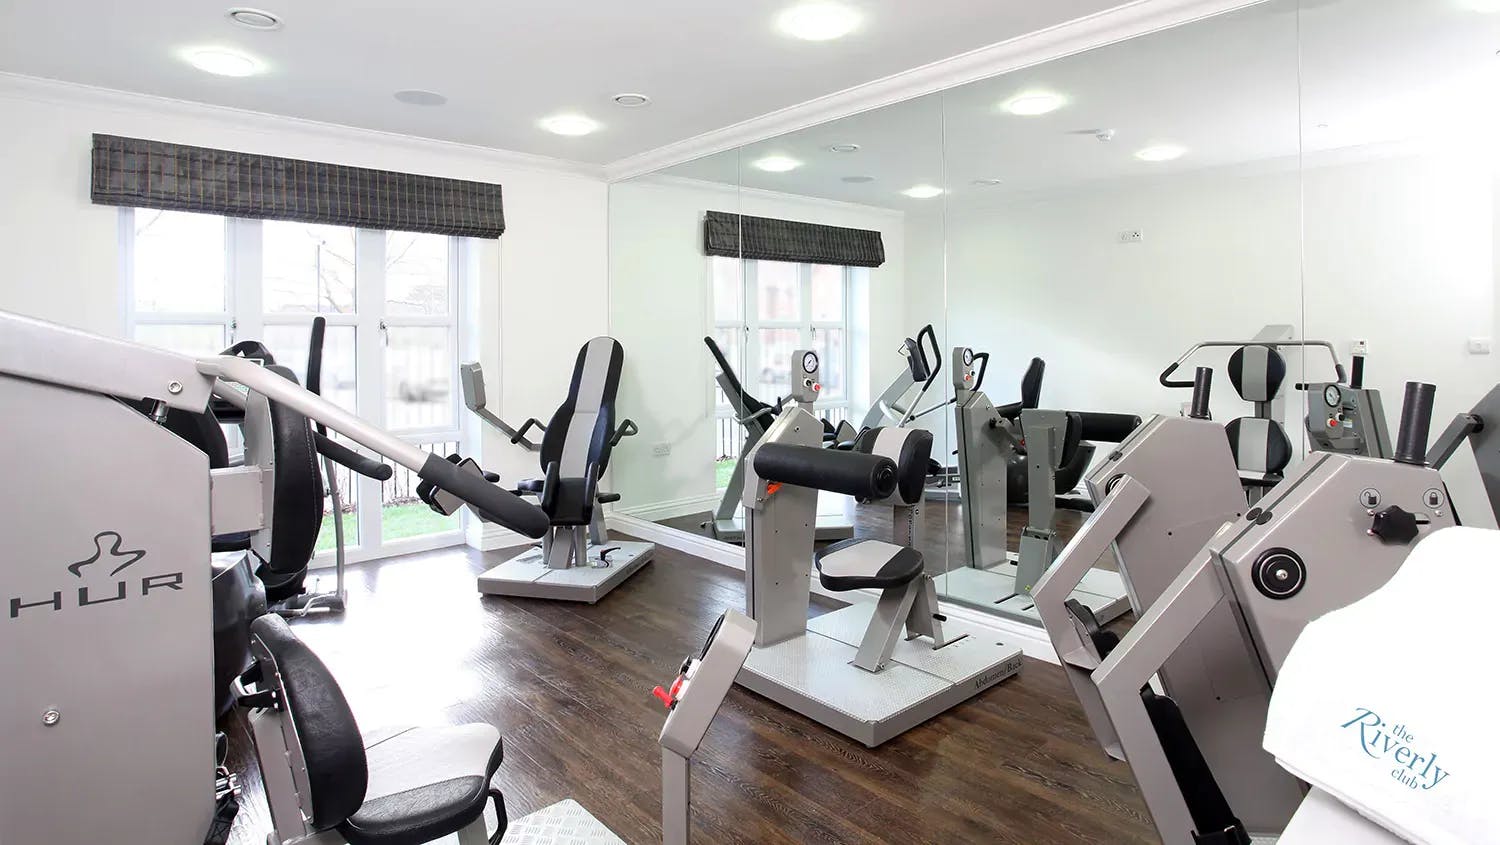 Gym at Bridge House Care Home in Abingdon, Oxfordshire